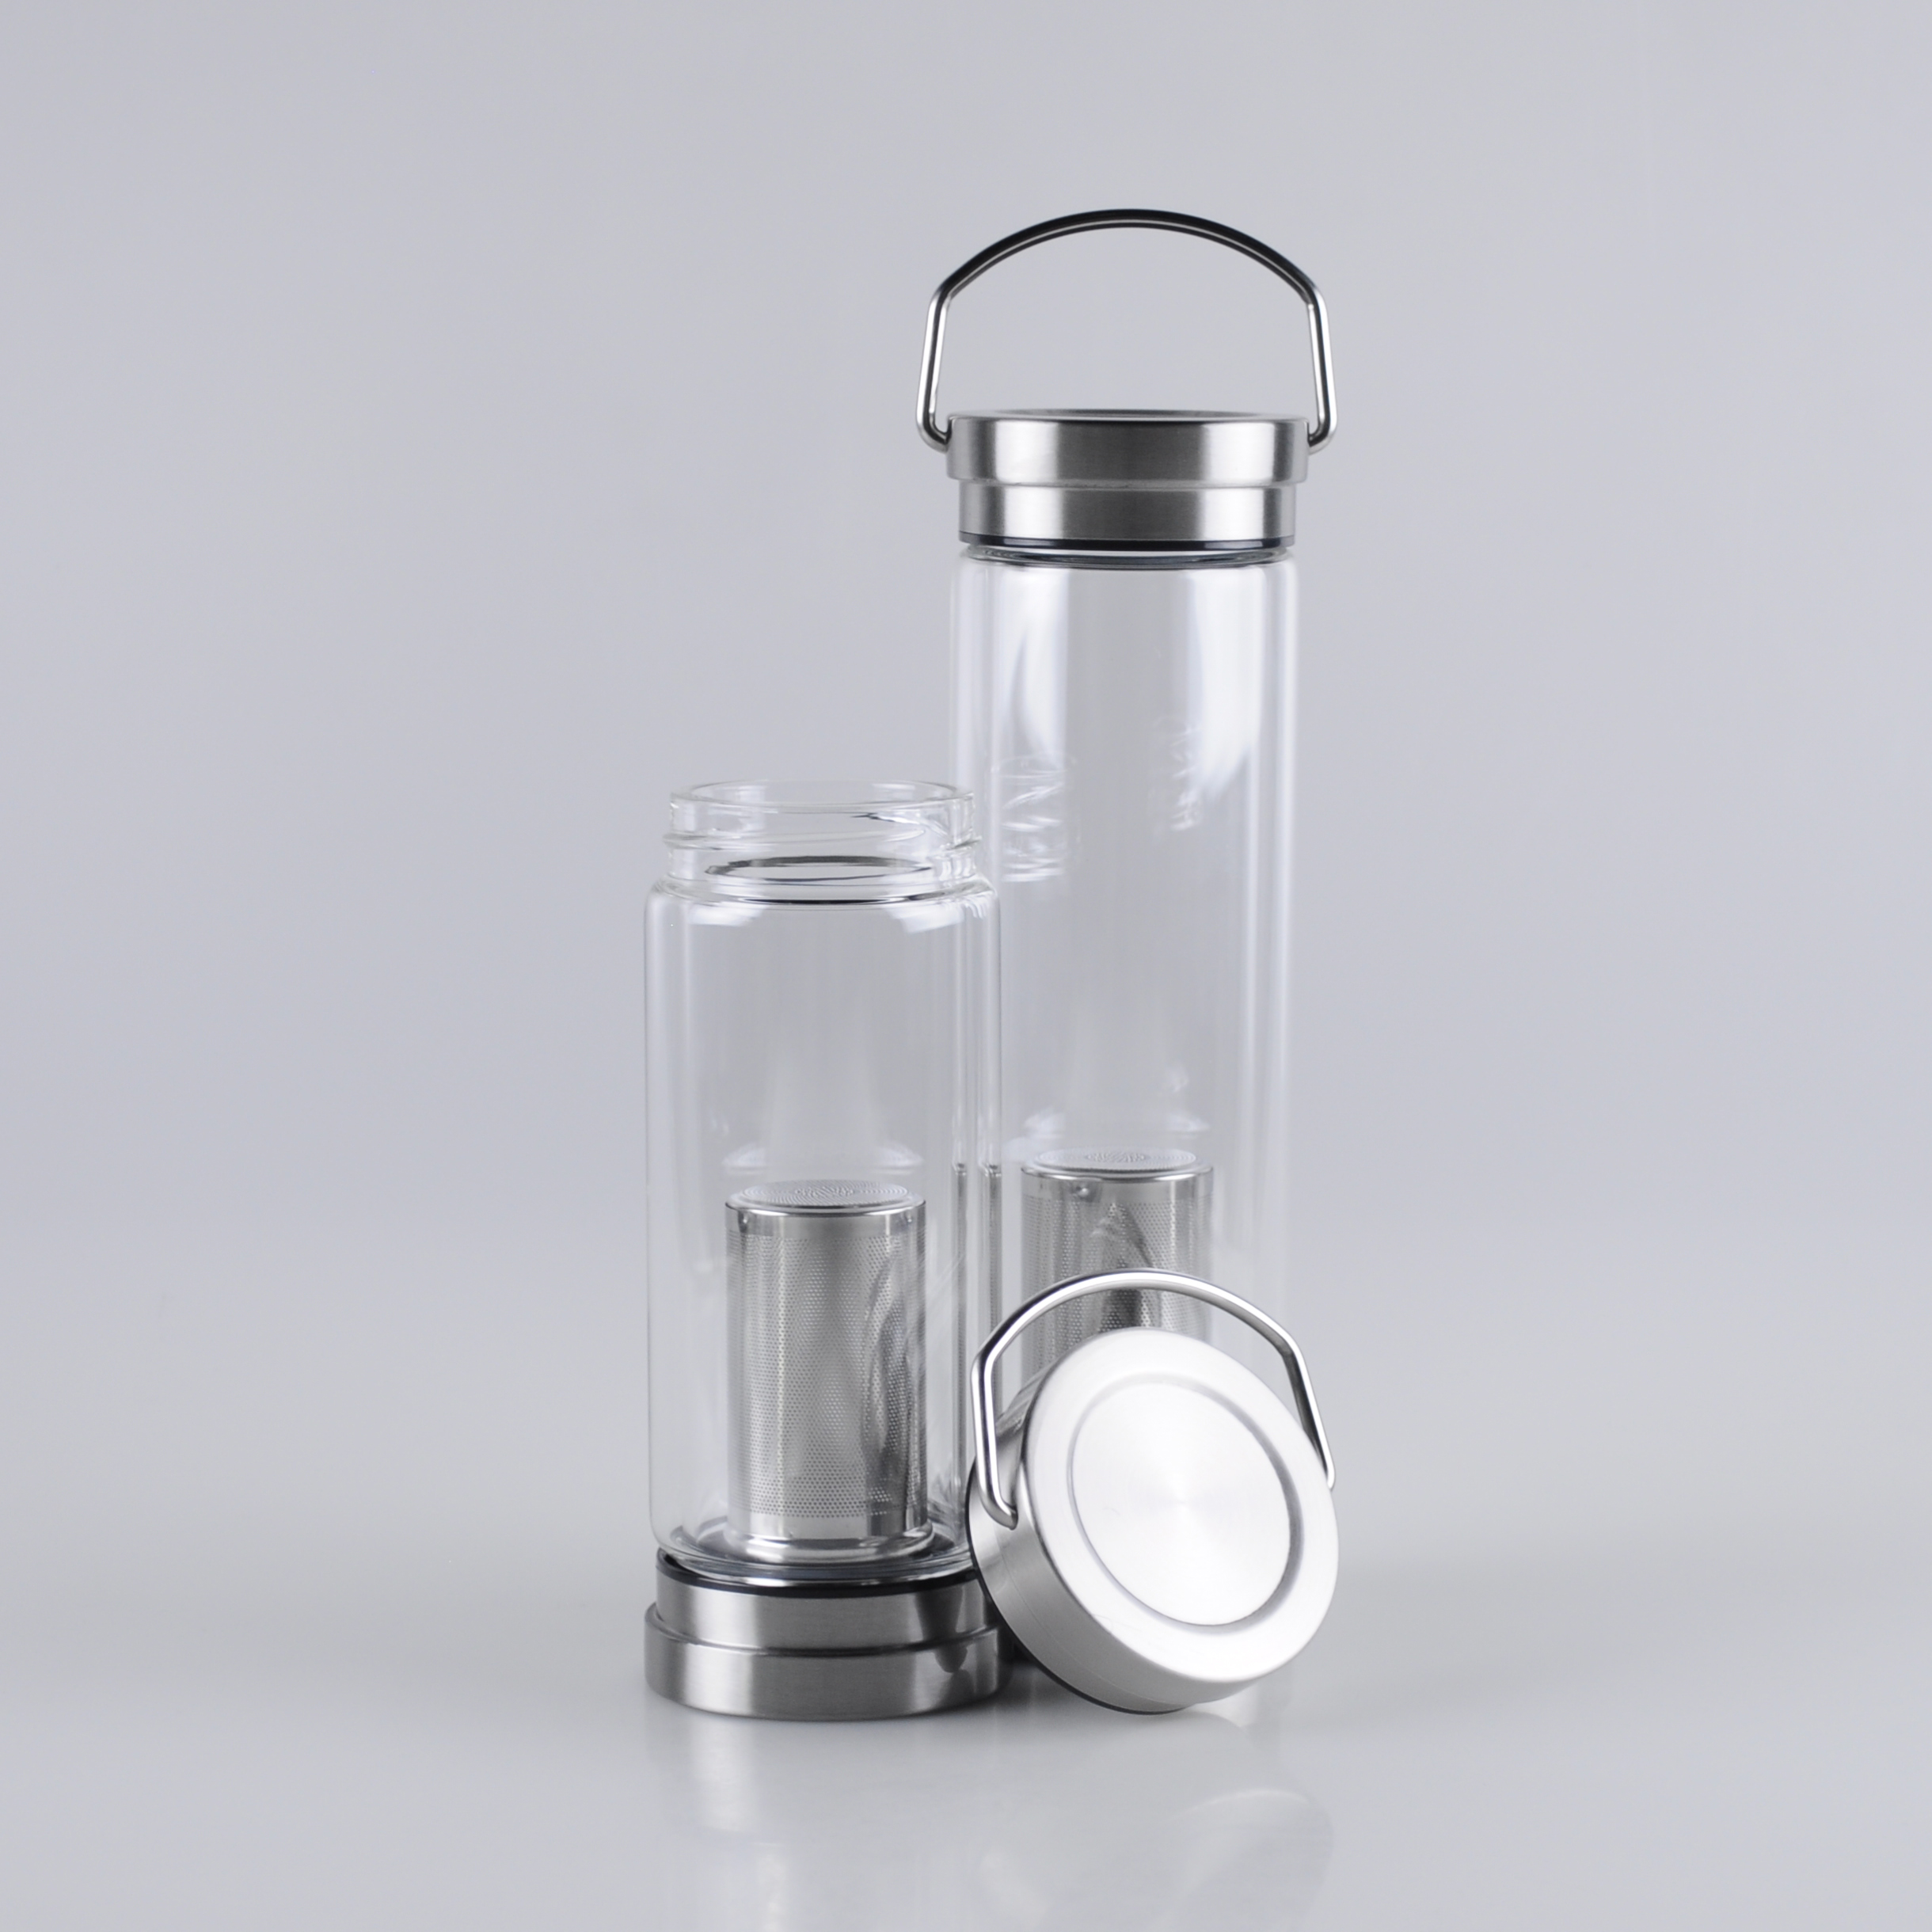 300ml 450ml Carrying Stainless Steel Lid Borosilicate Glass Tea Cup Safeshine